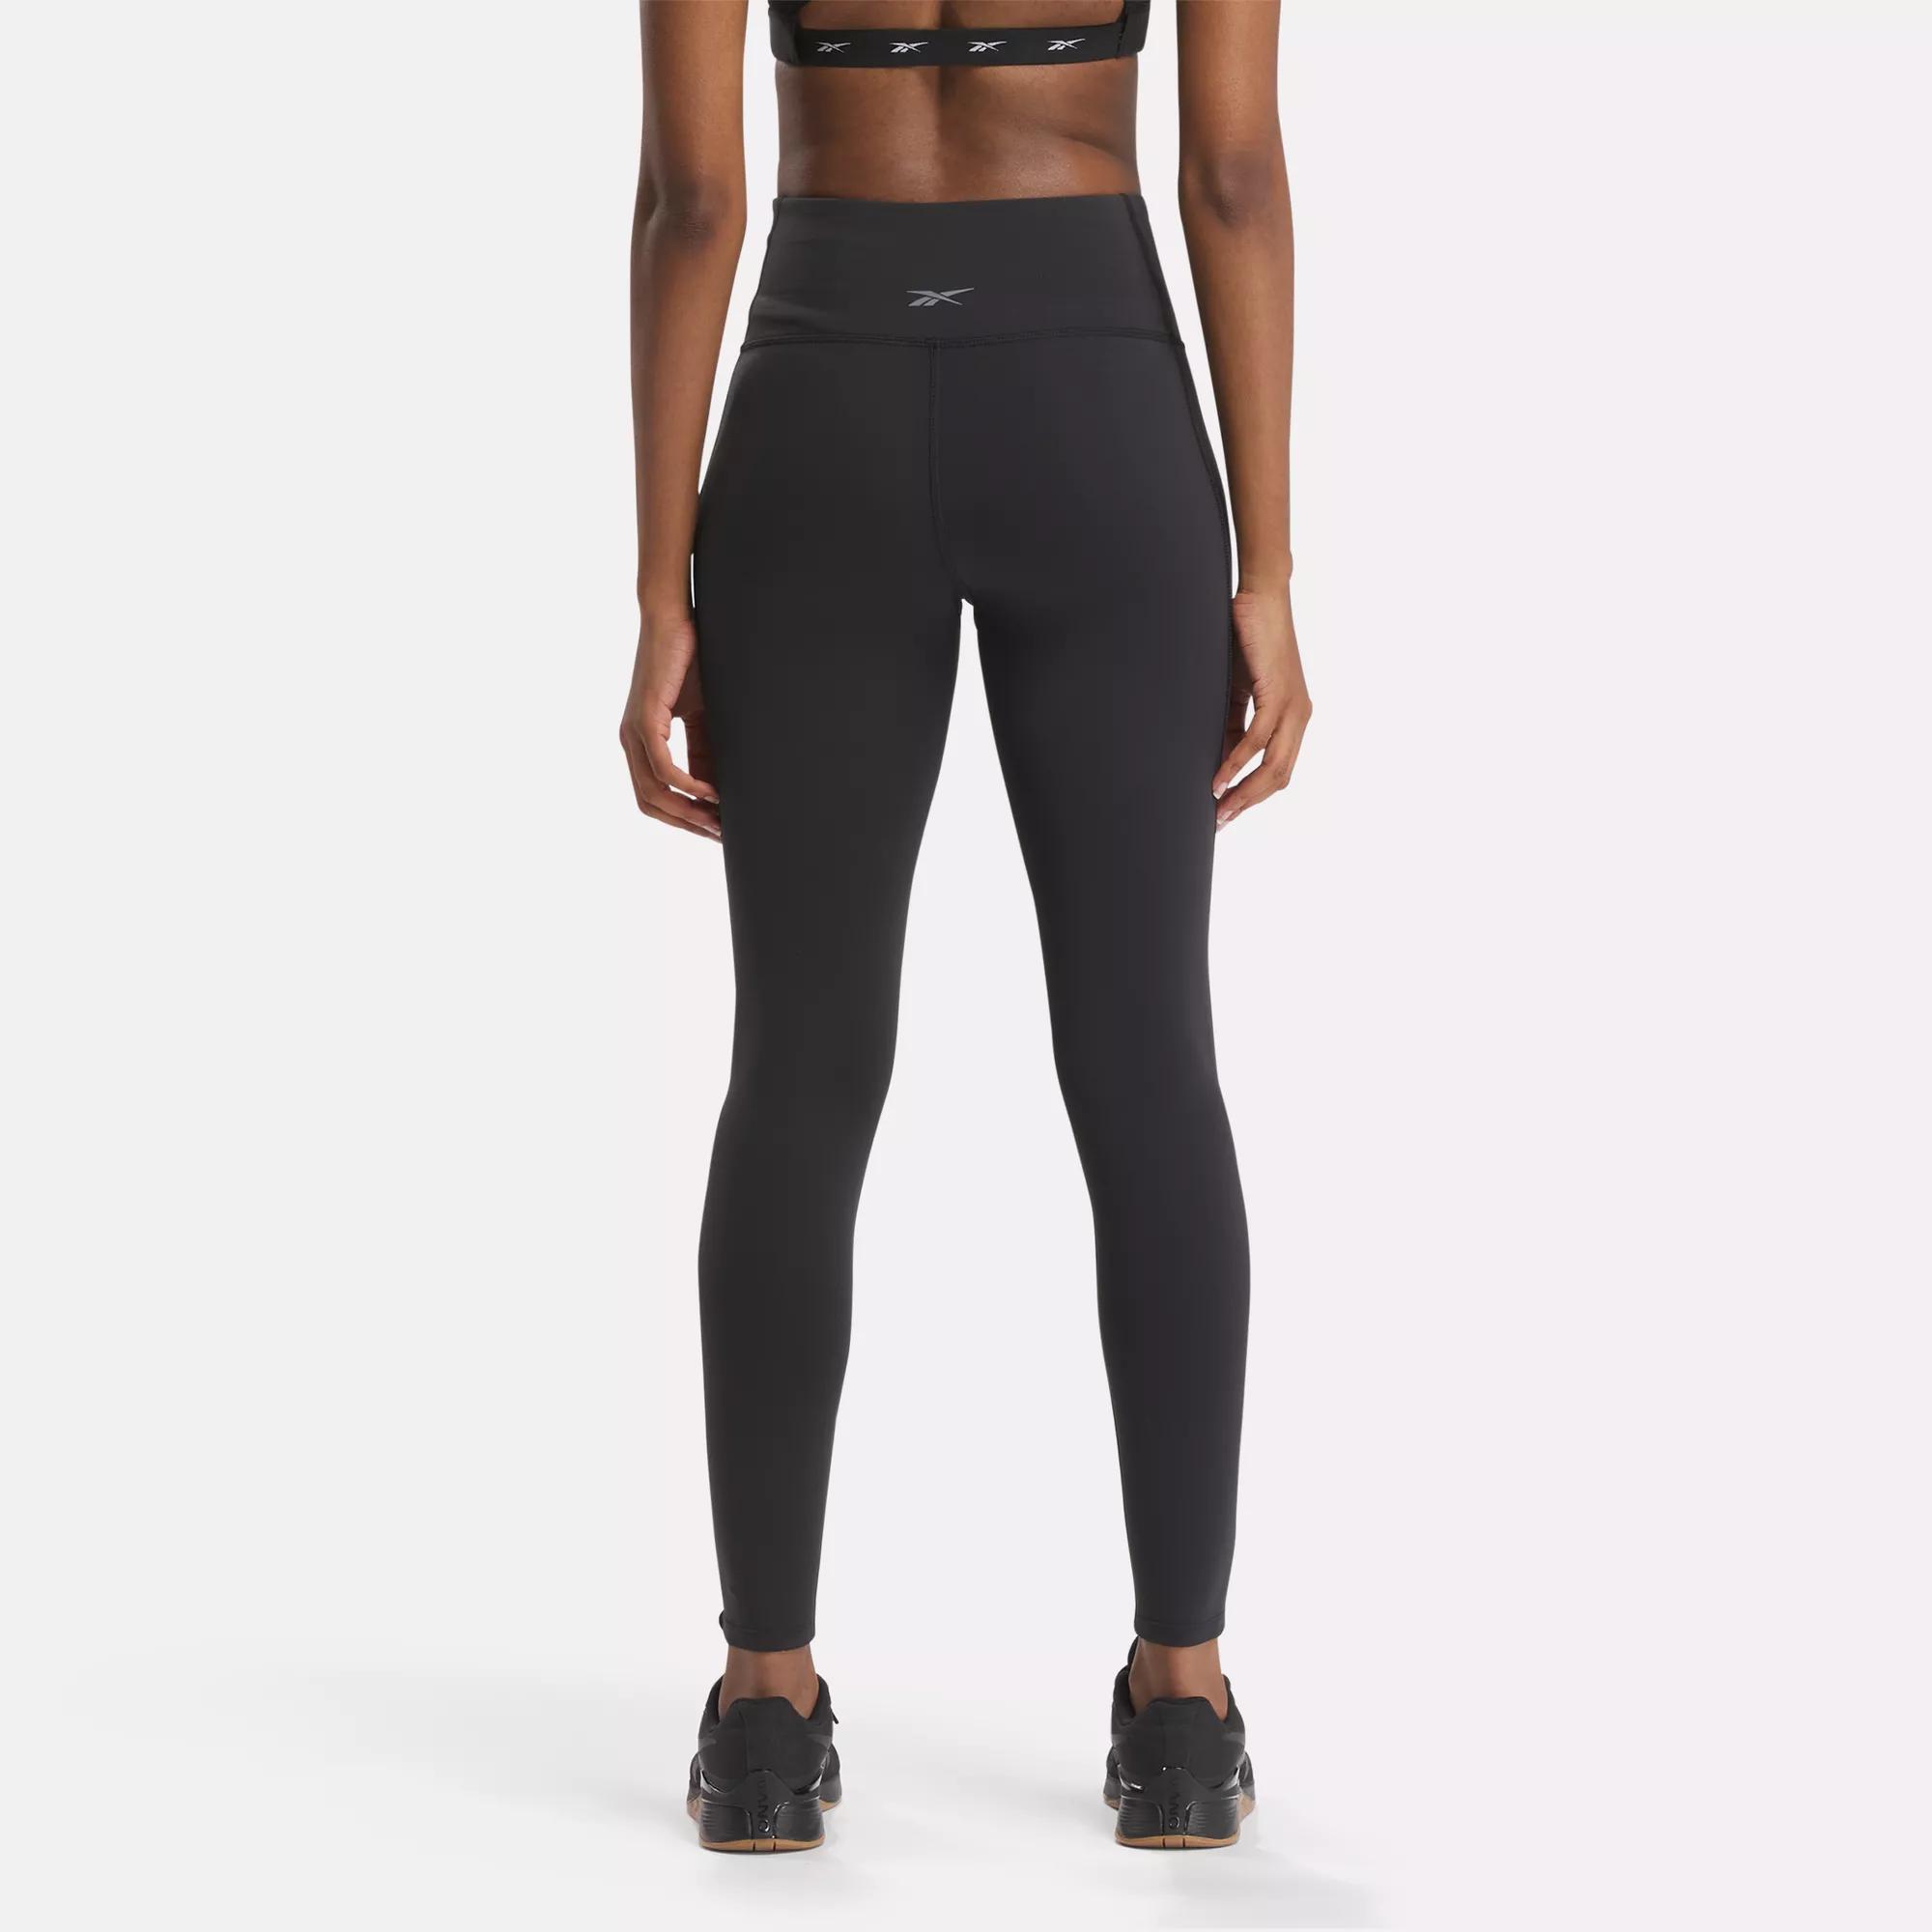 Reebok Women's Lux High-Waisted Tights (Plus Size)